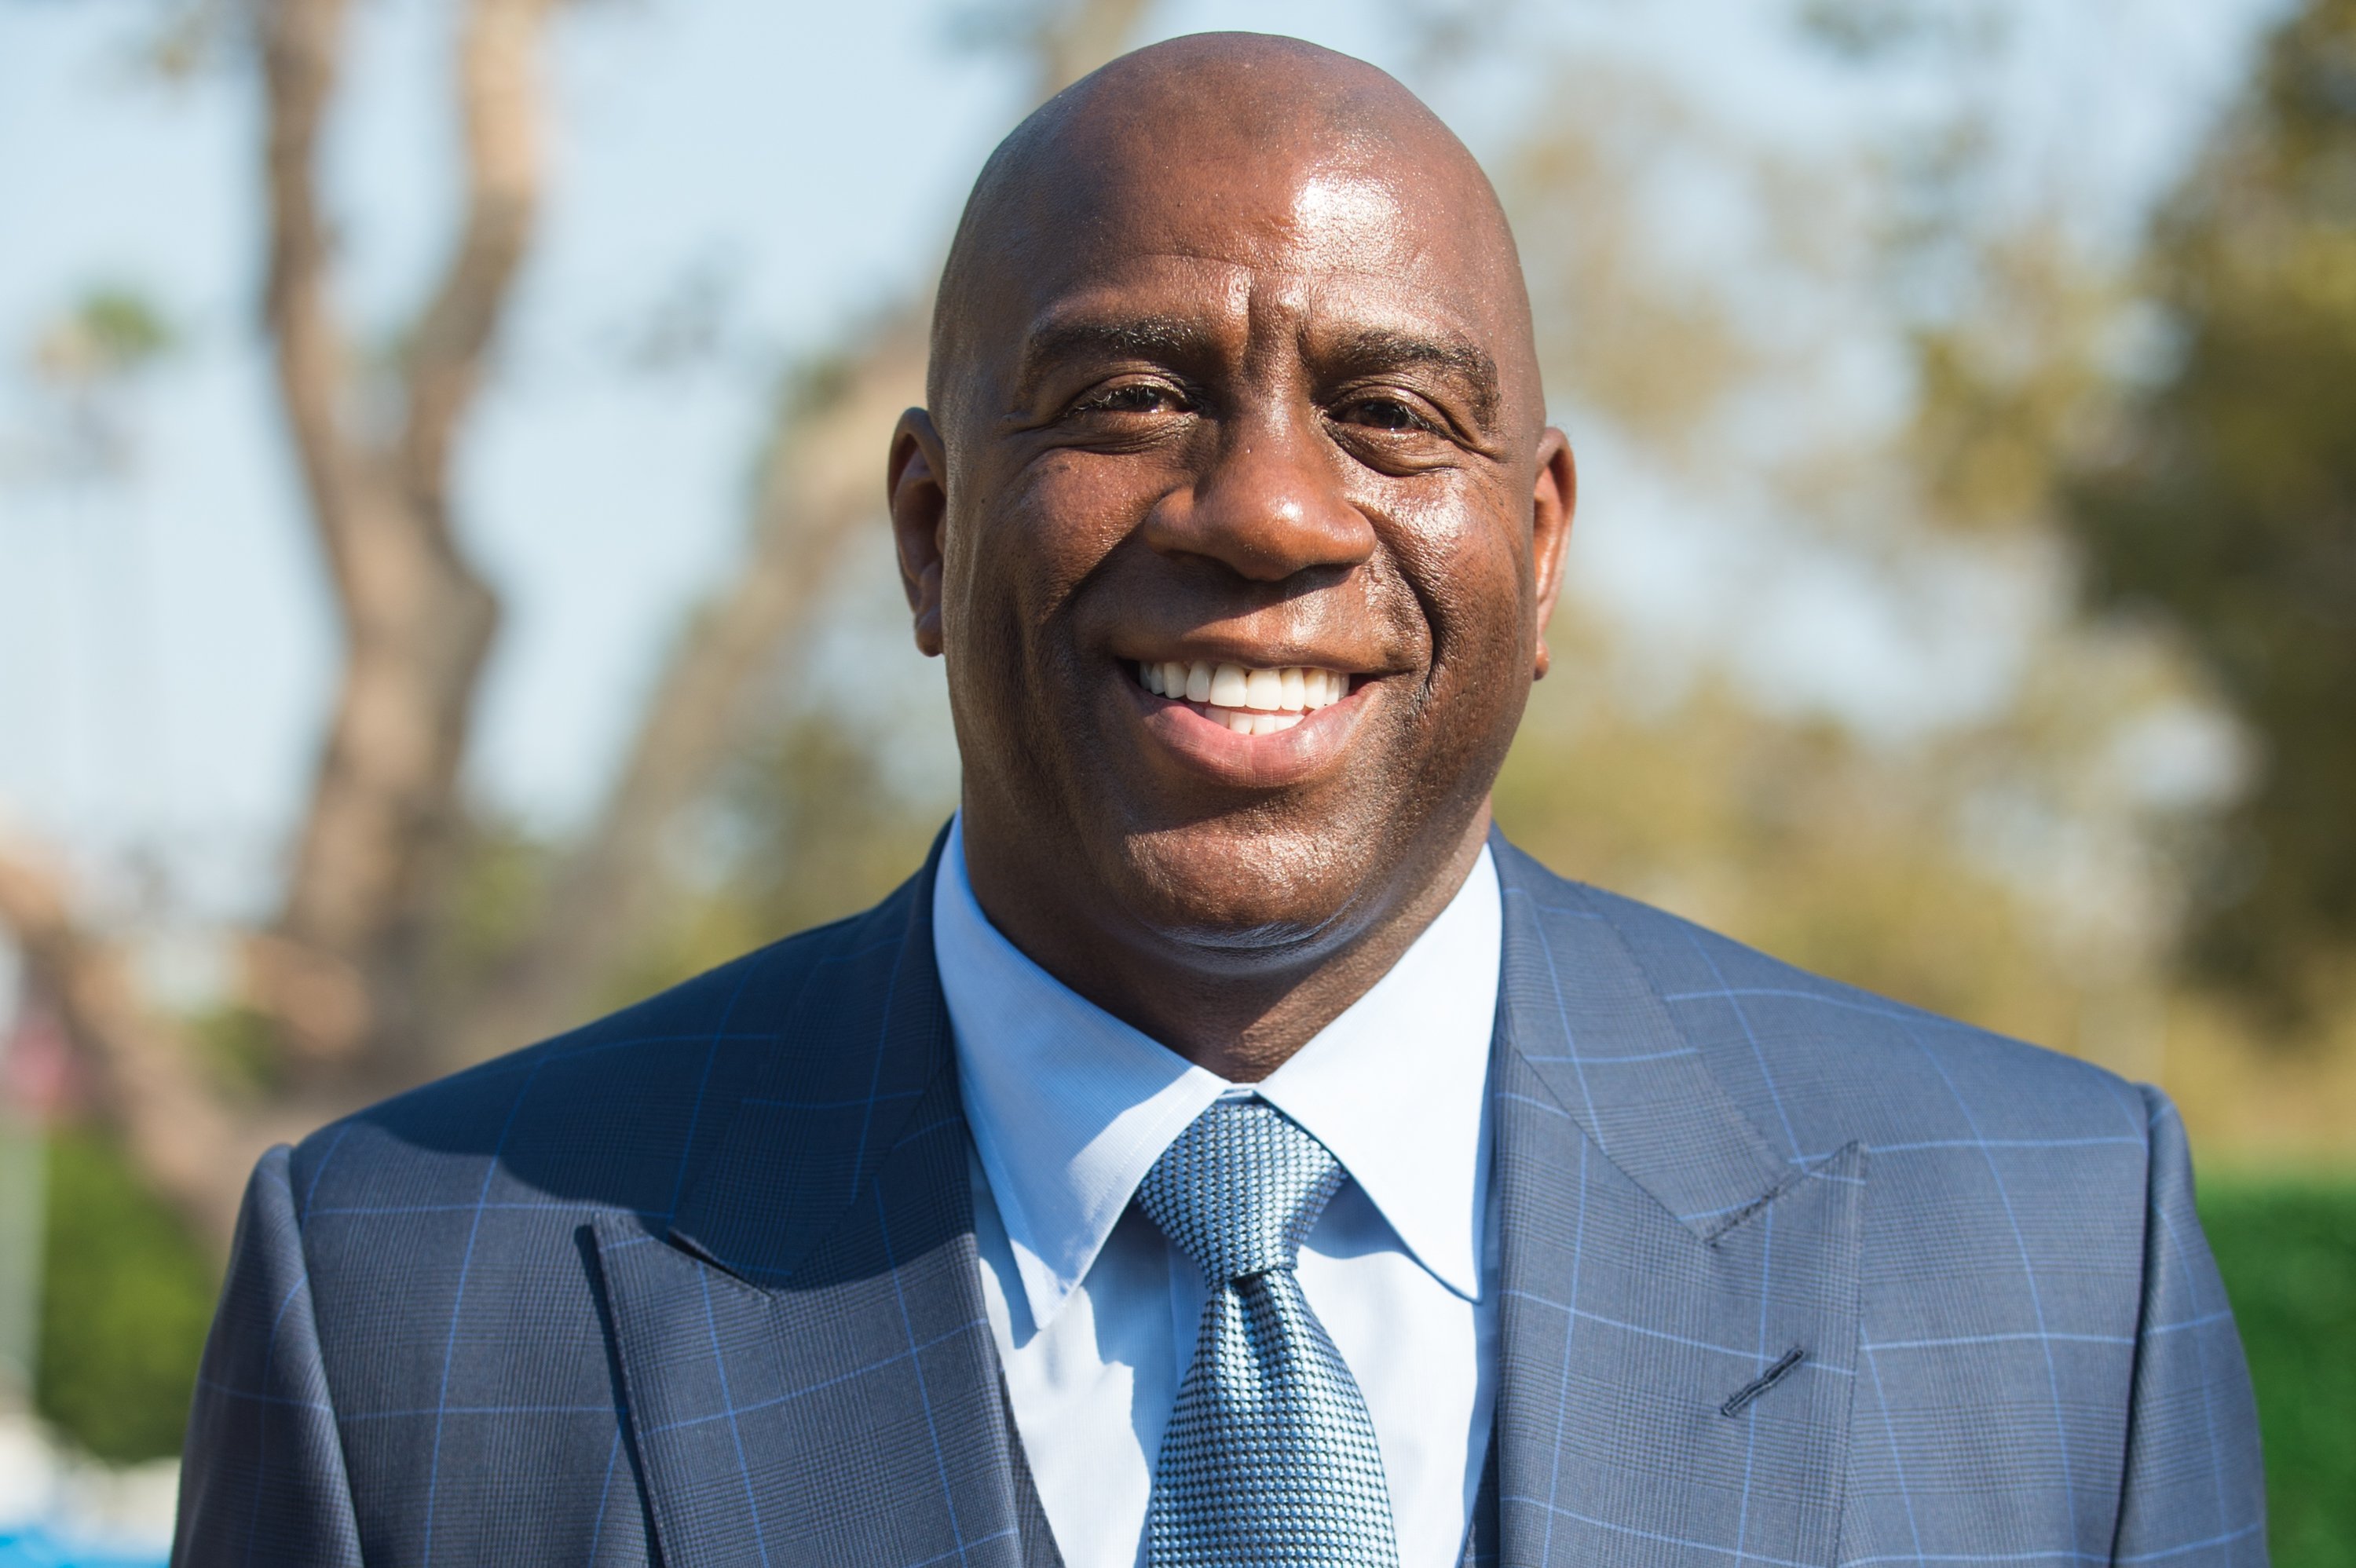 Earvin 'Magic' Johnson at the Los Angeles Football Club stadium groundbreaking ceremony on Aug. 23, 2016 in California | Photo: Getty Images